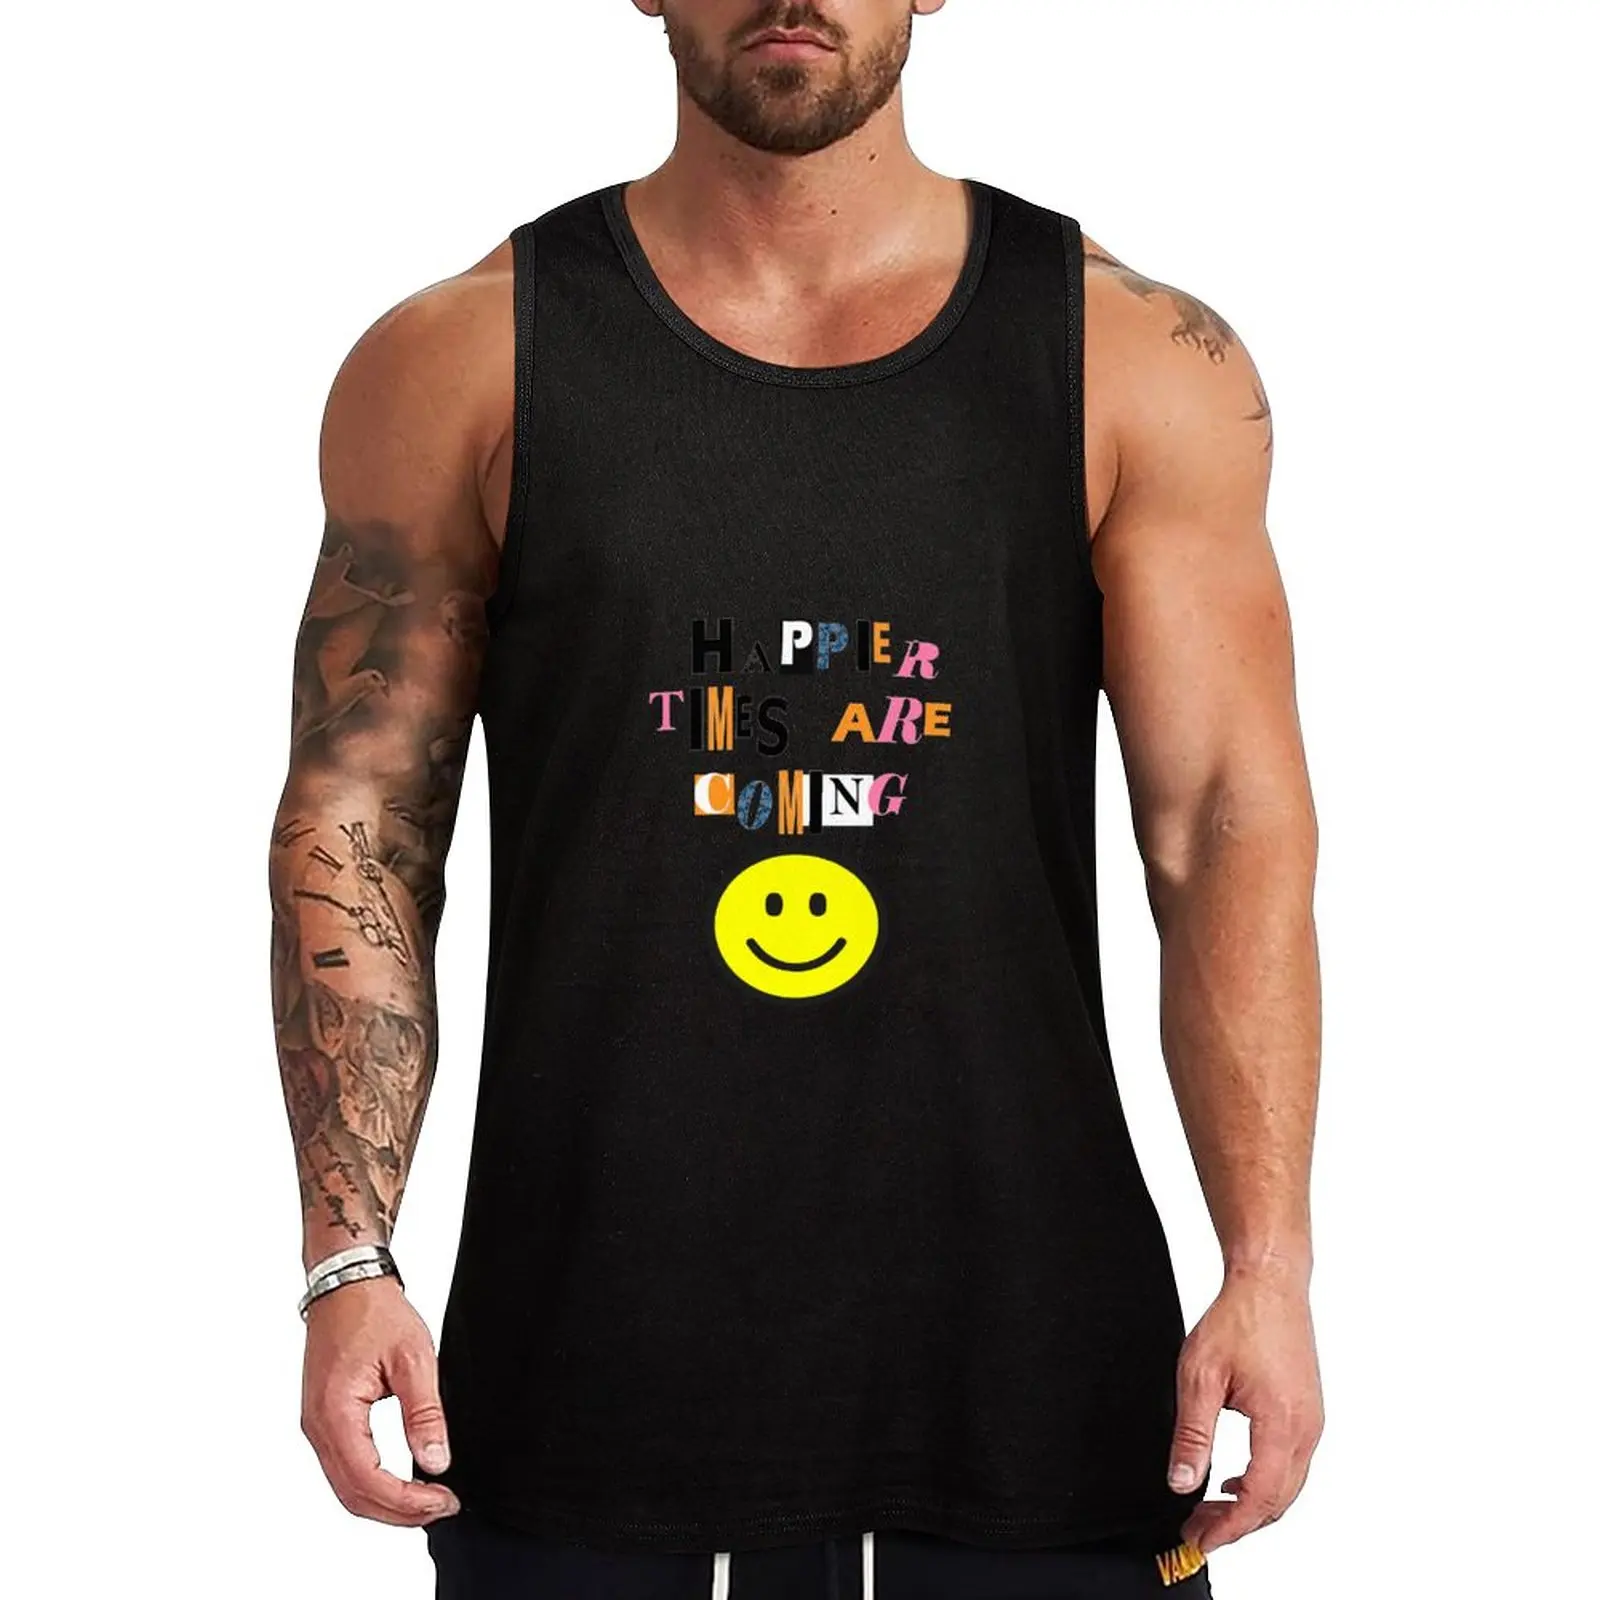 

New This Les Boys Les Girls charity T-shirt will remind you happy times are coming Tank Top gym training accessories